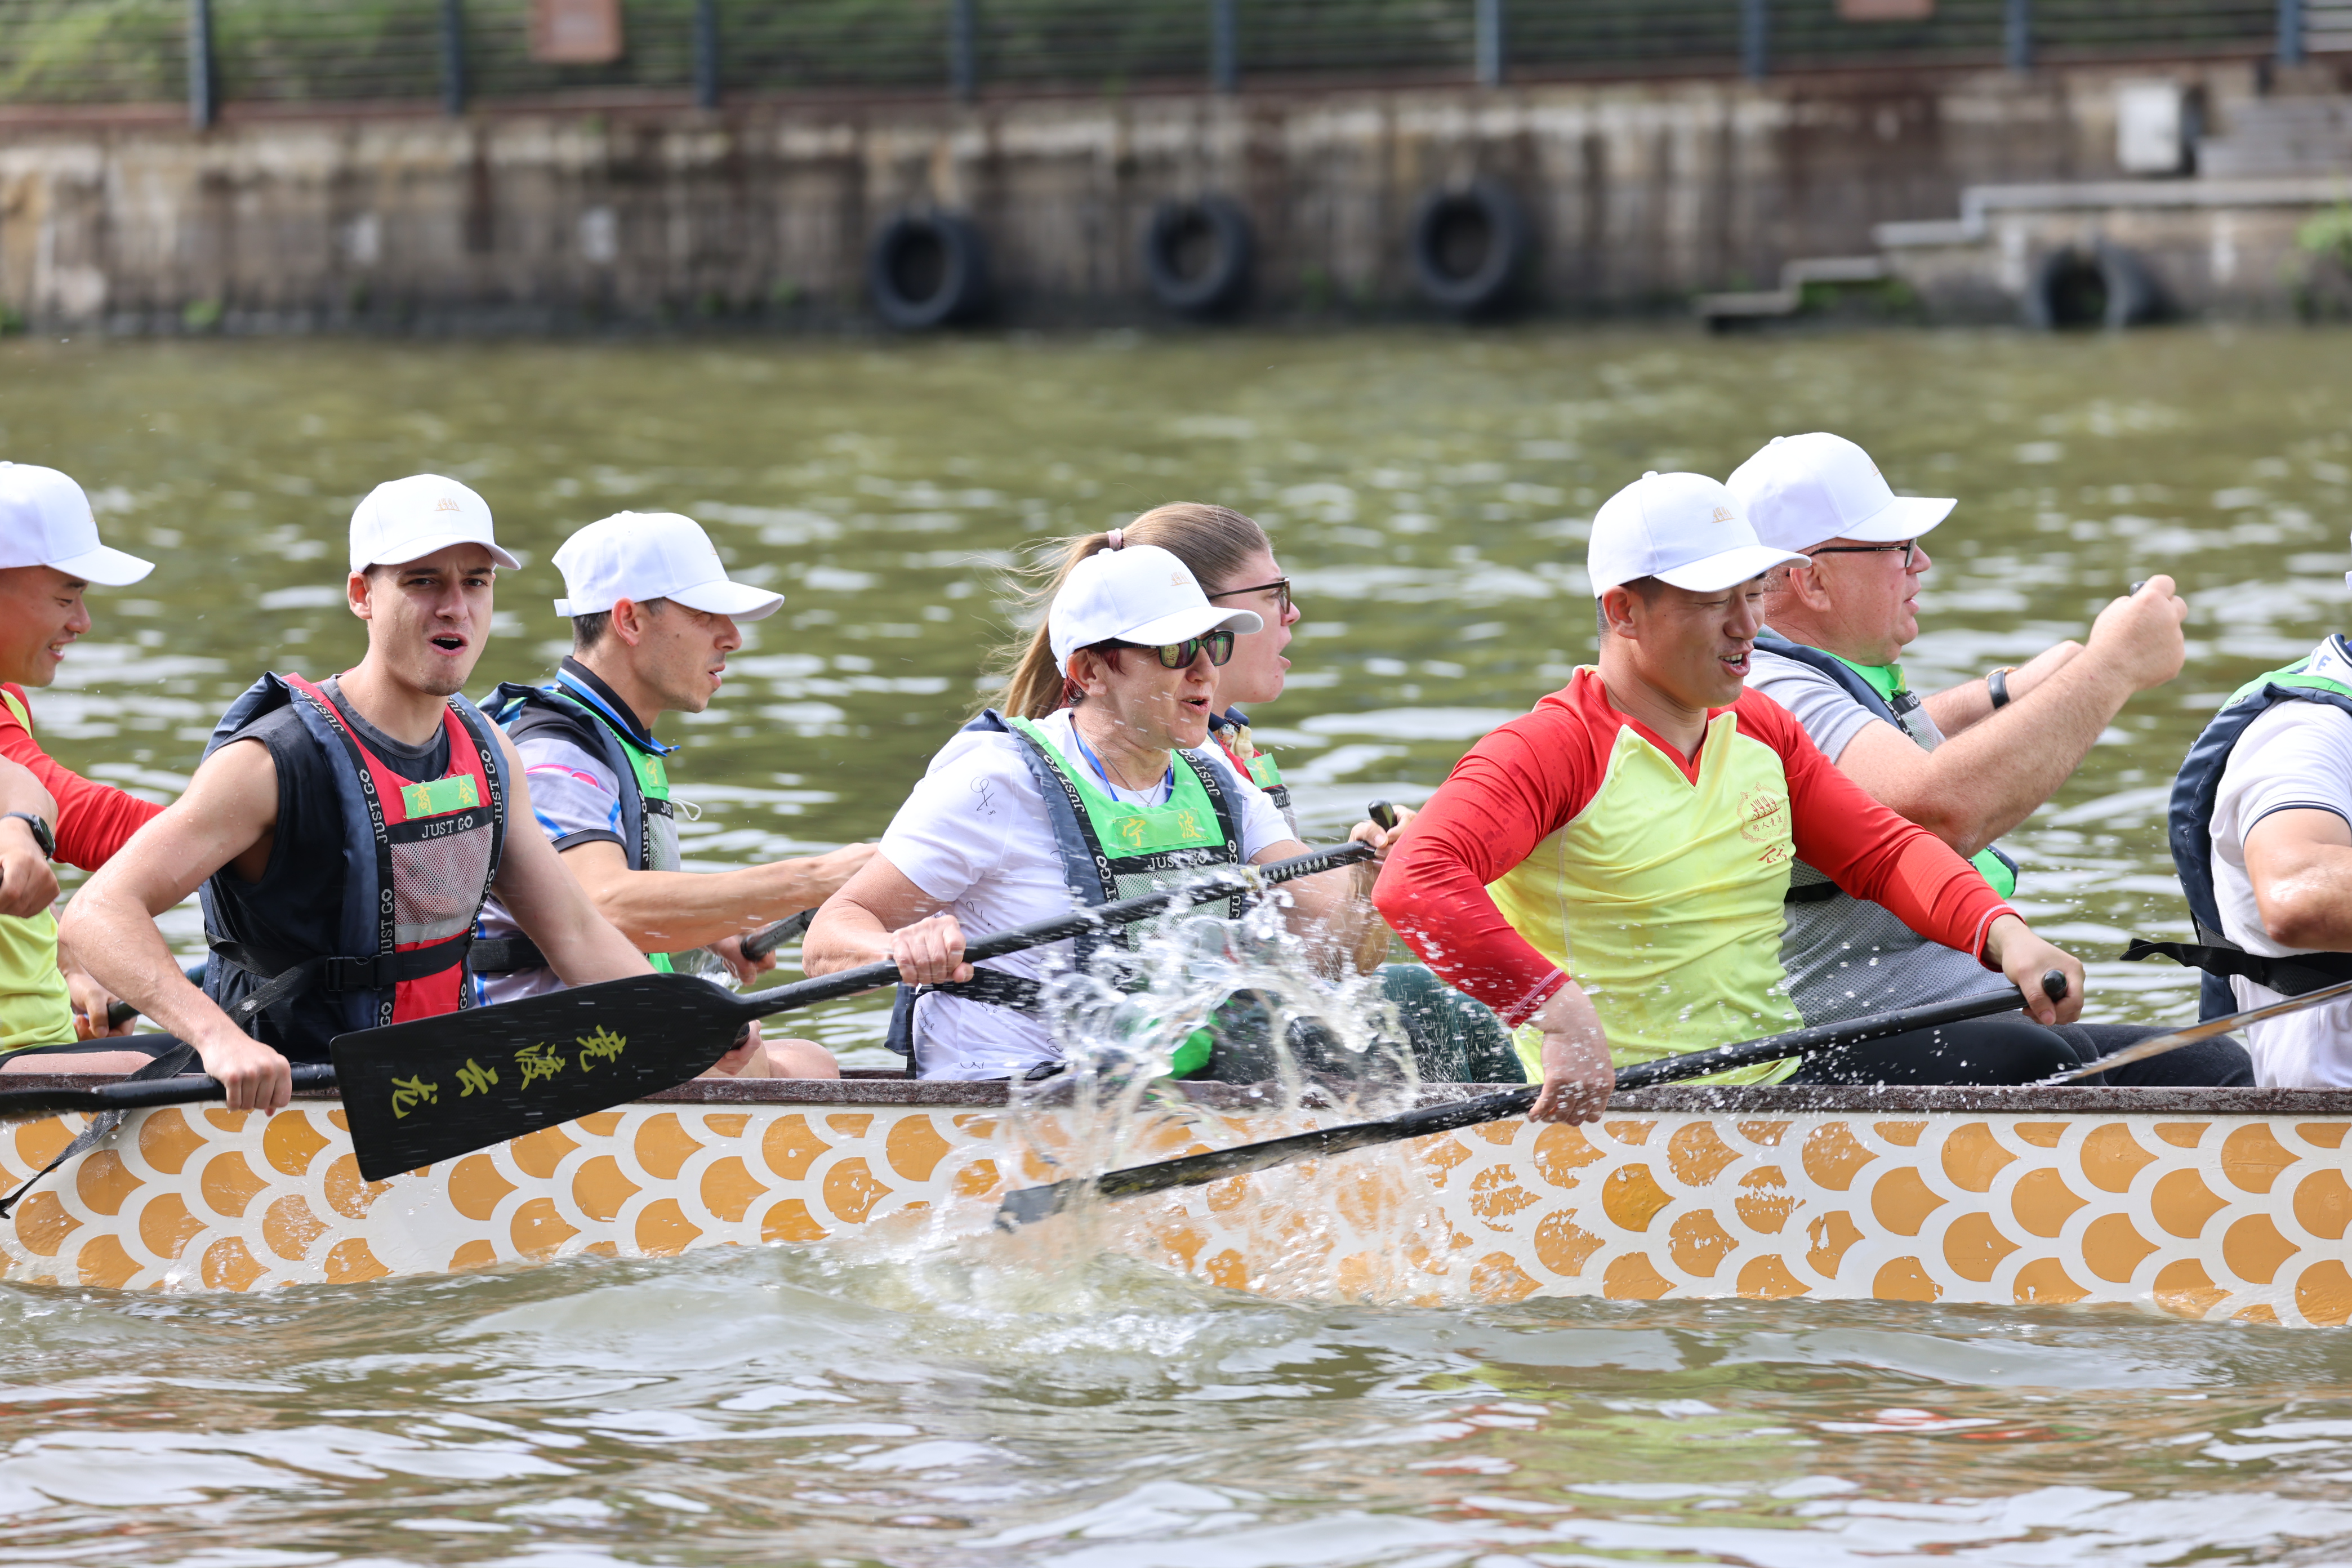 Bulgarian paddlers take part in a friendly dragon boat race in Yunlong town, Ningbo City, Zhejiang Province on May 19, 2024. [Photo provided to CGTN]